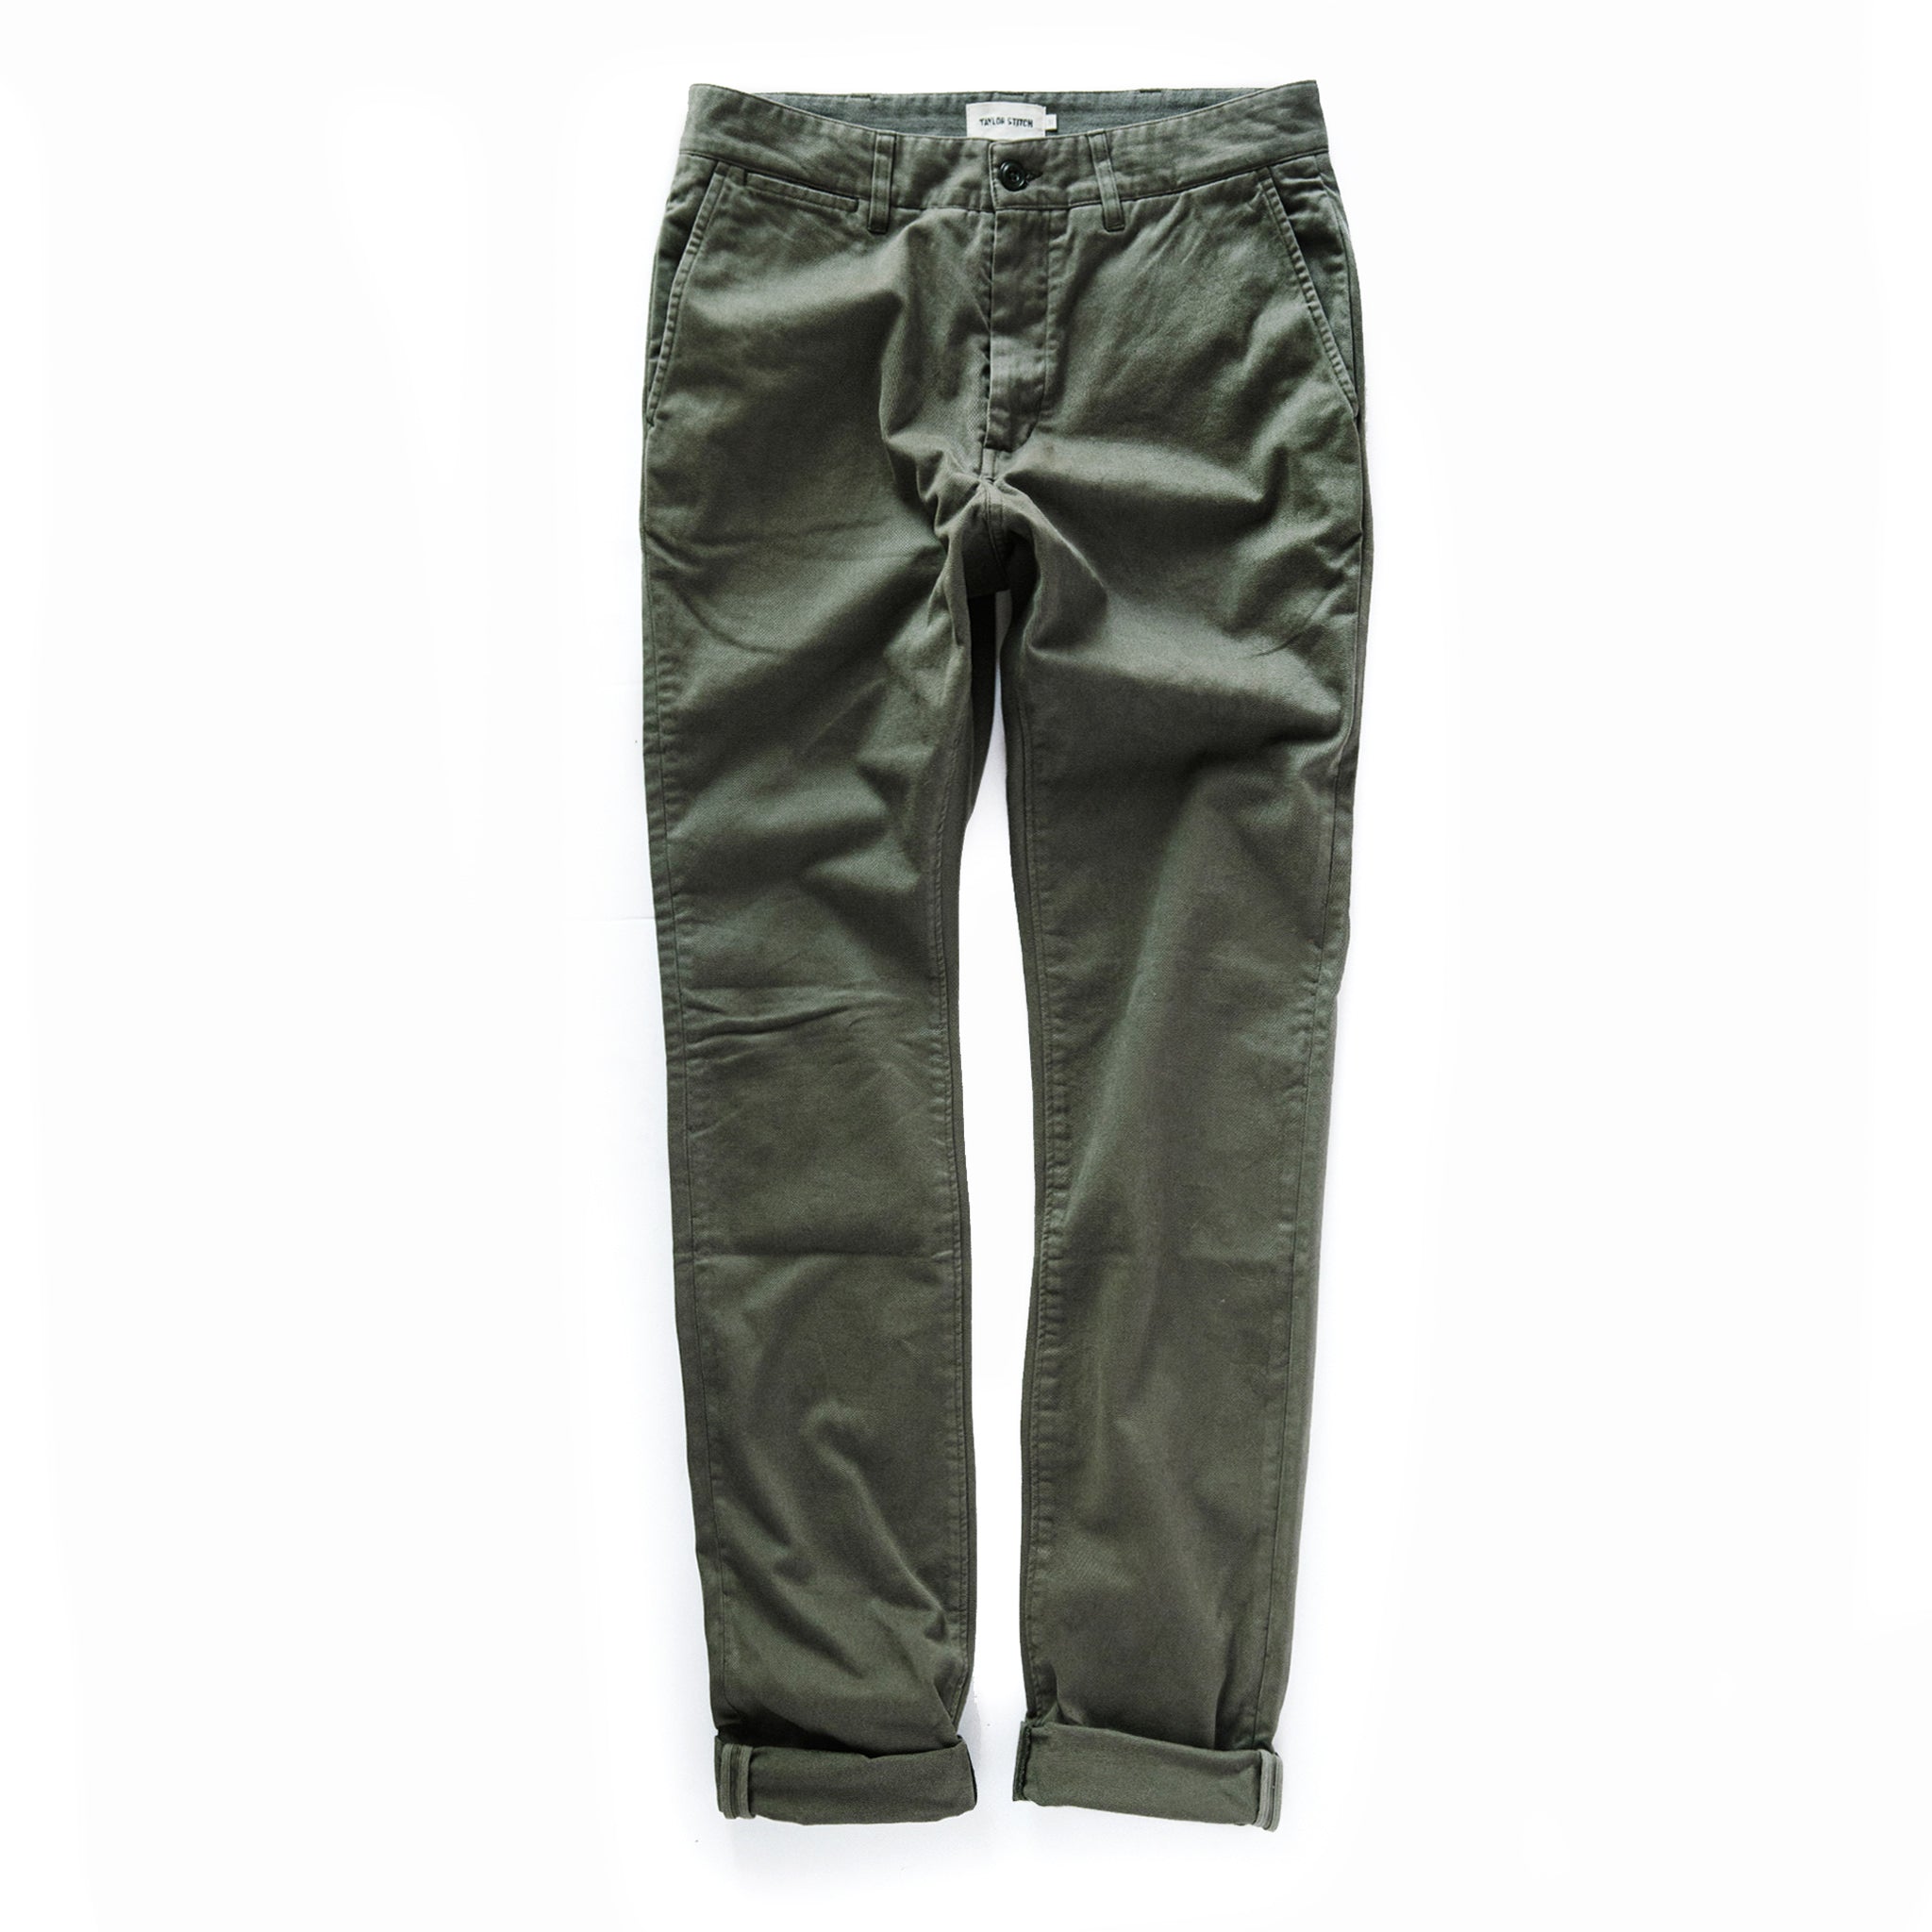 The. Slim Foundation Chino Pant in Organic Olive Green | Taylor Stitch